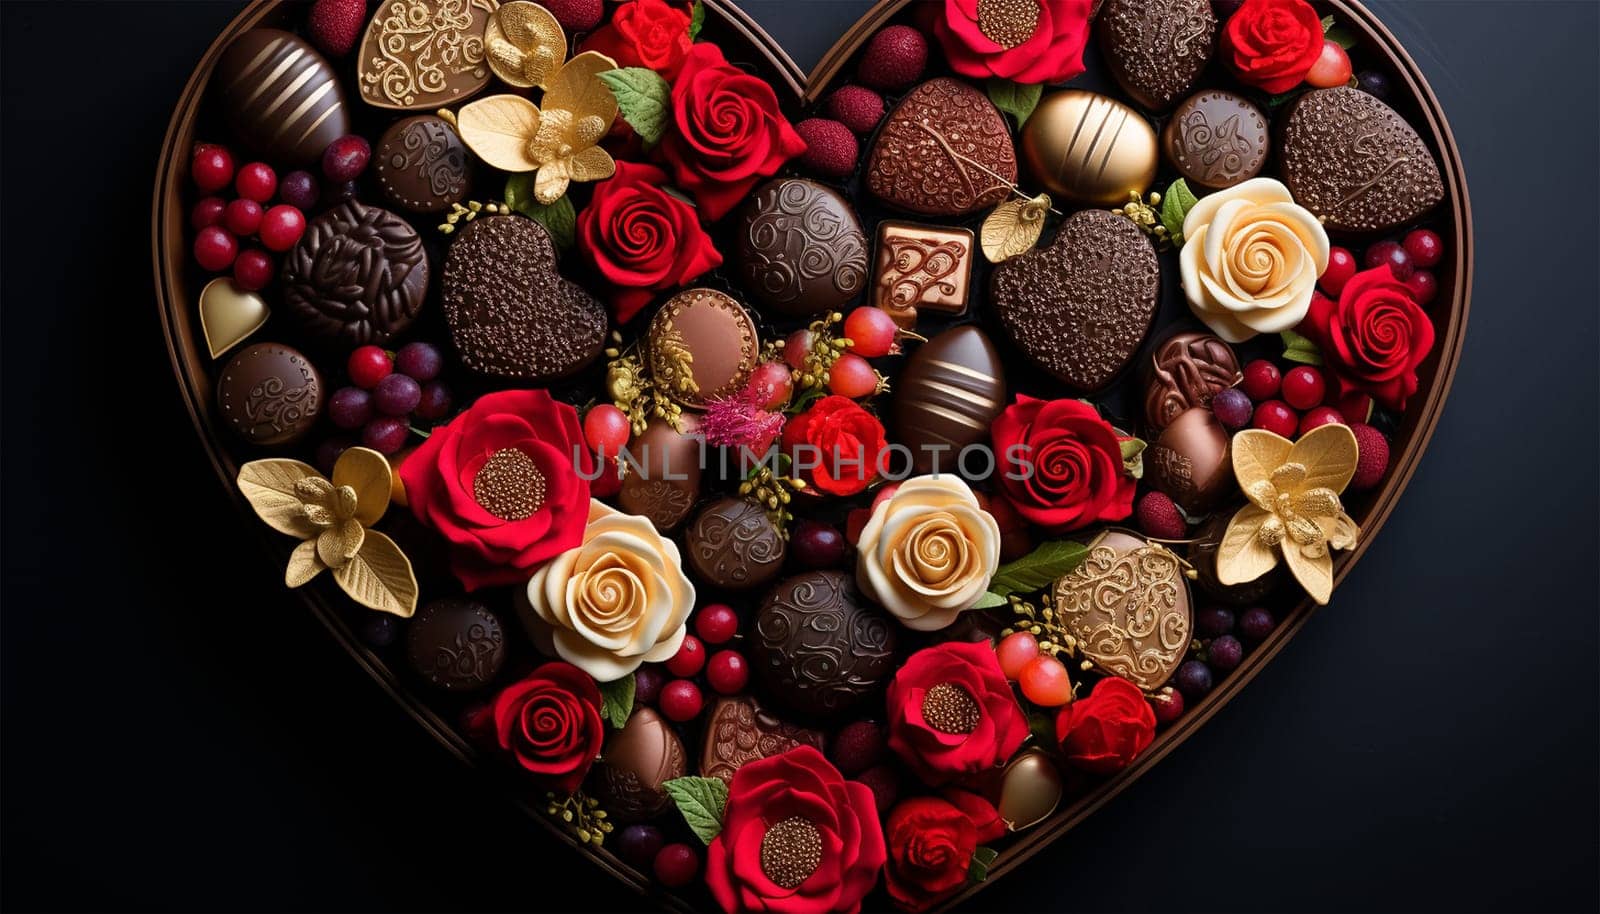 Red heart-shaped box for Valentine's Day, with delicious chocolate and flowers. with dark background to give as a gift. Romantic candies copy space Happy Valentine Space for text